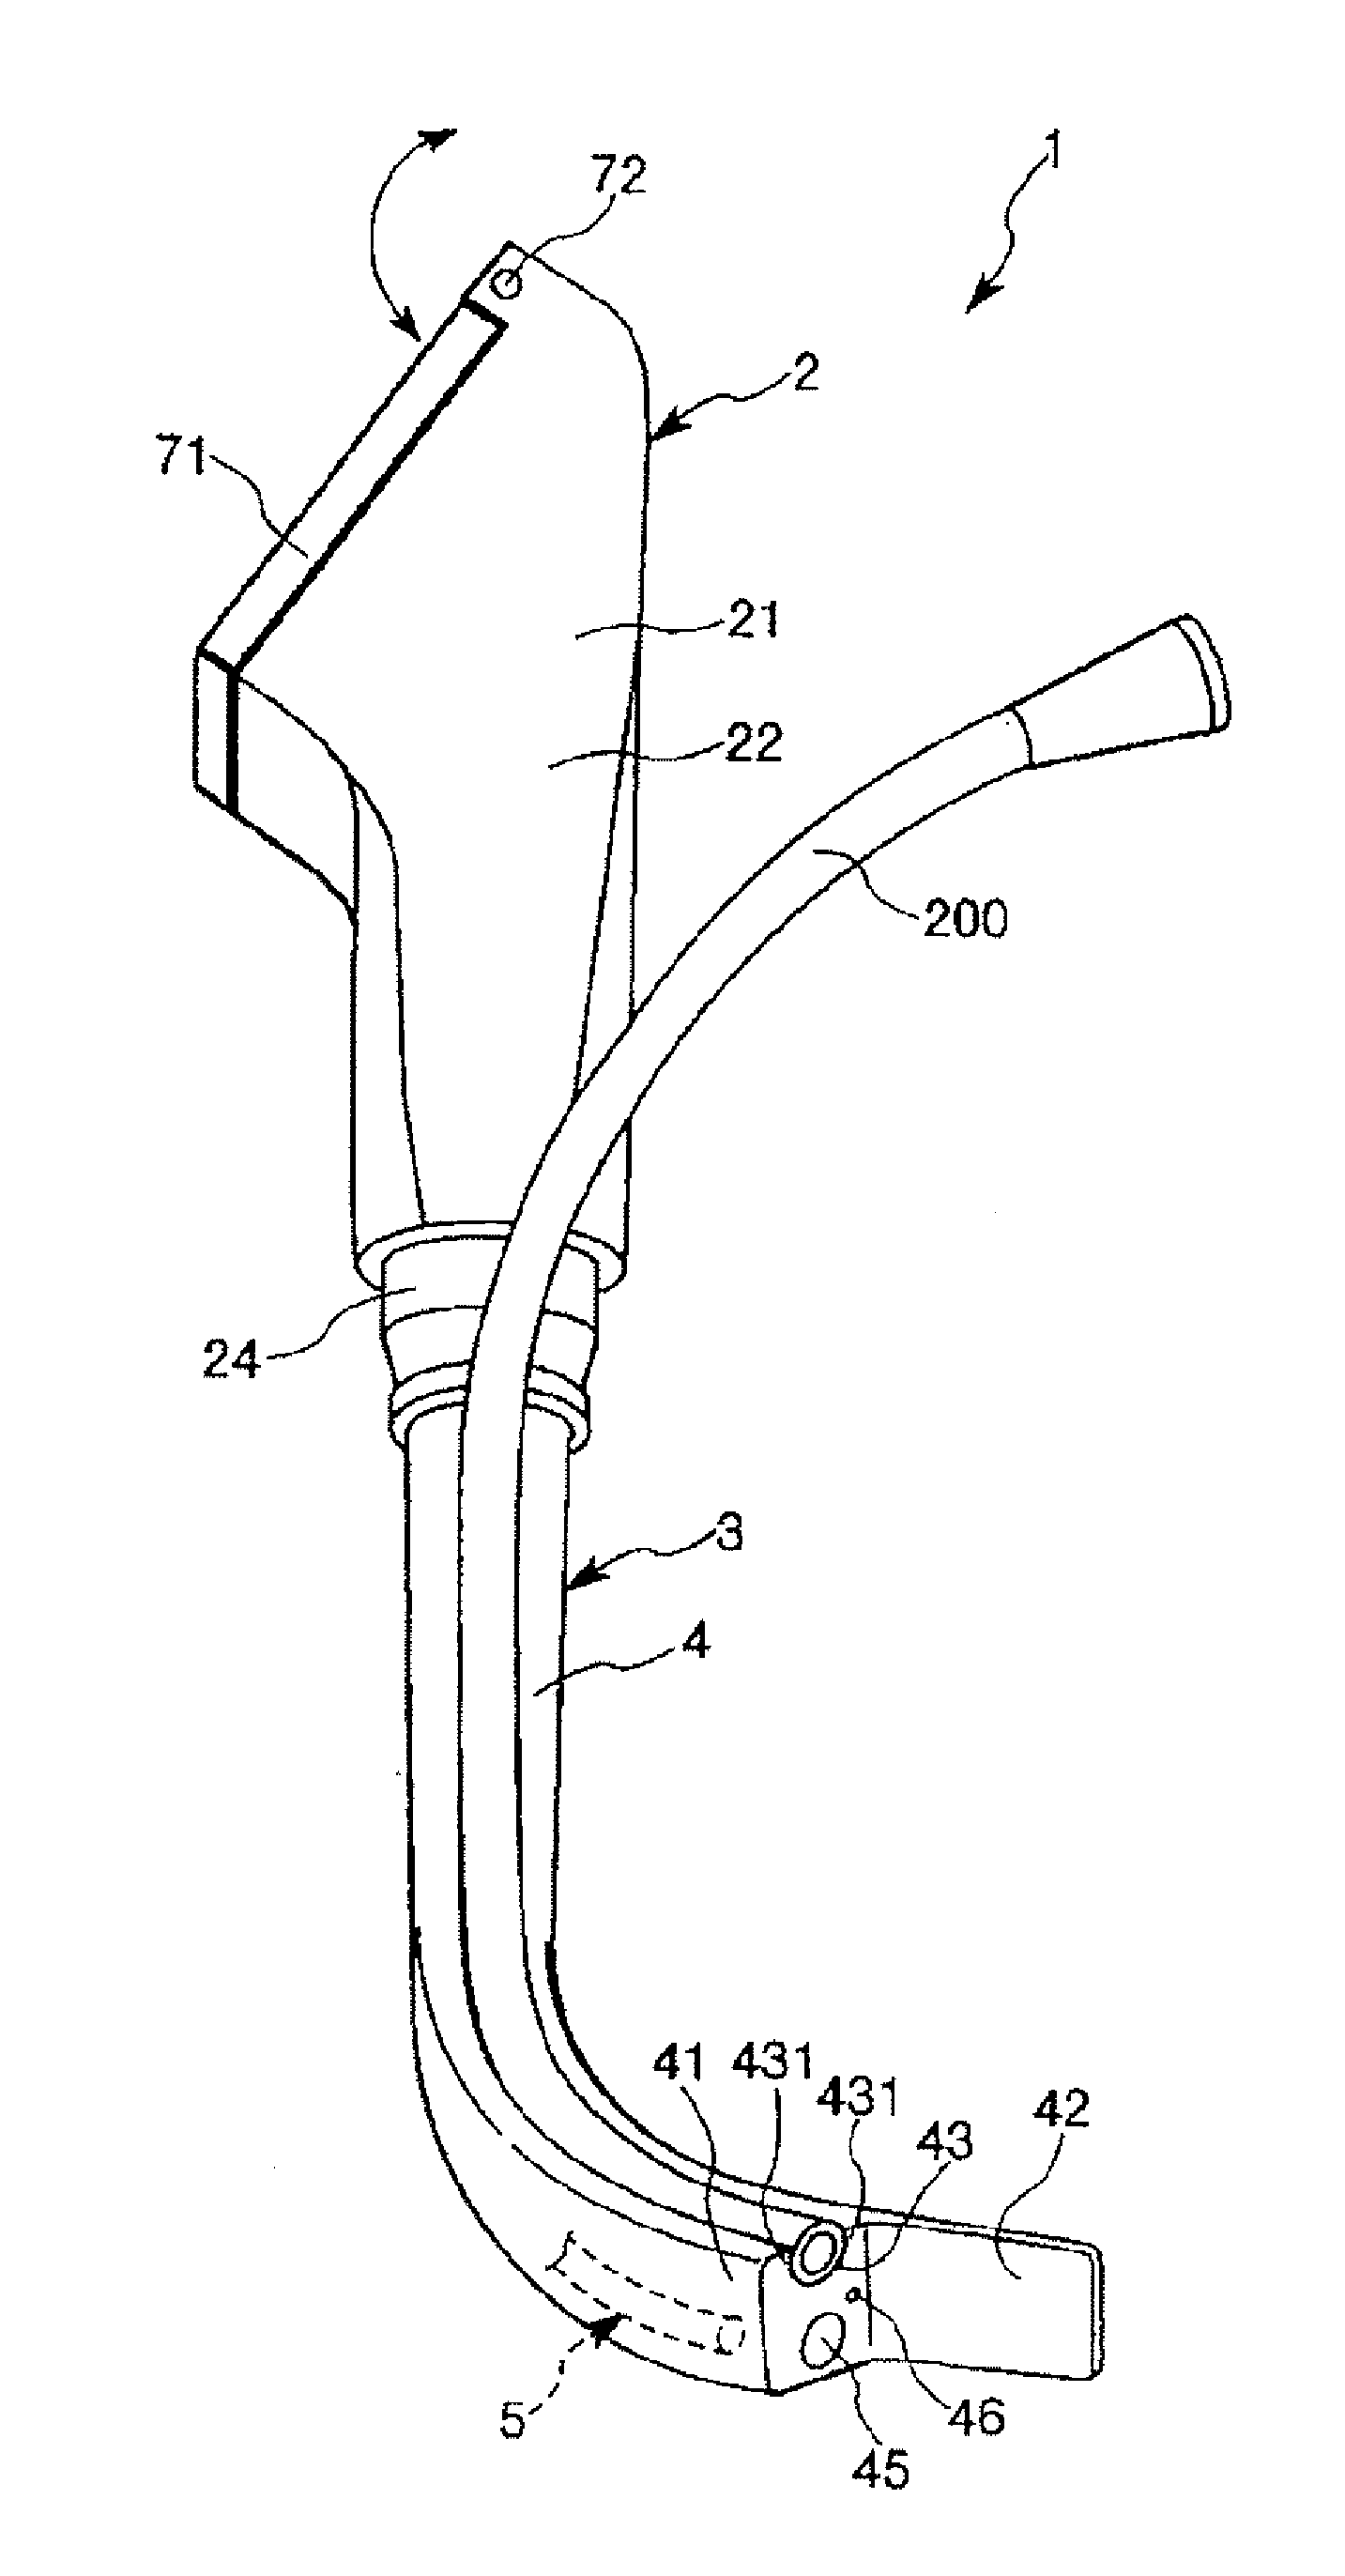 Intubation assistance apparatus and intubation assistance used in the apparatus